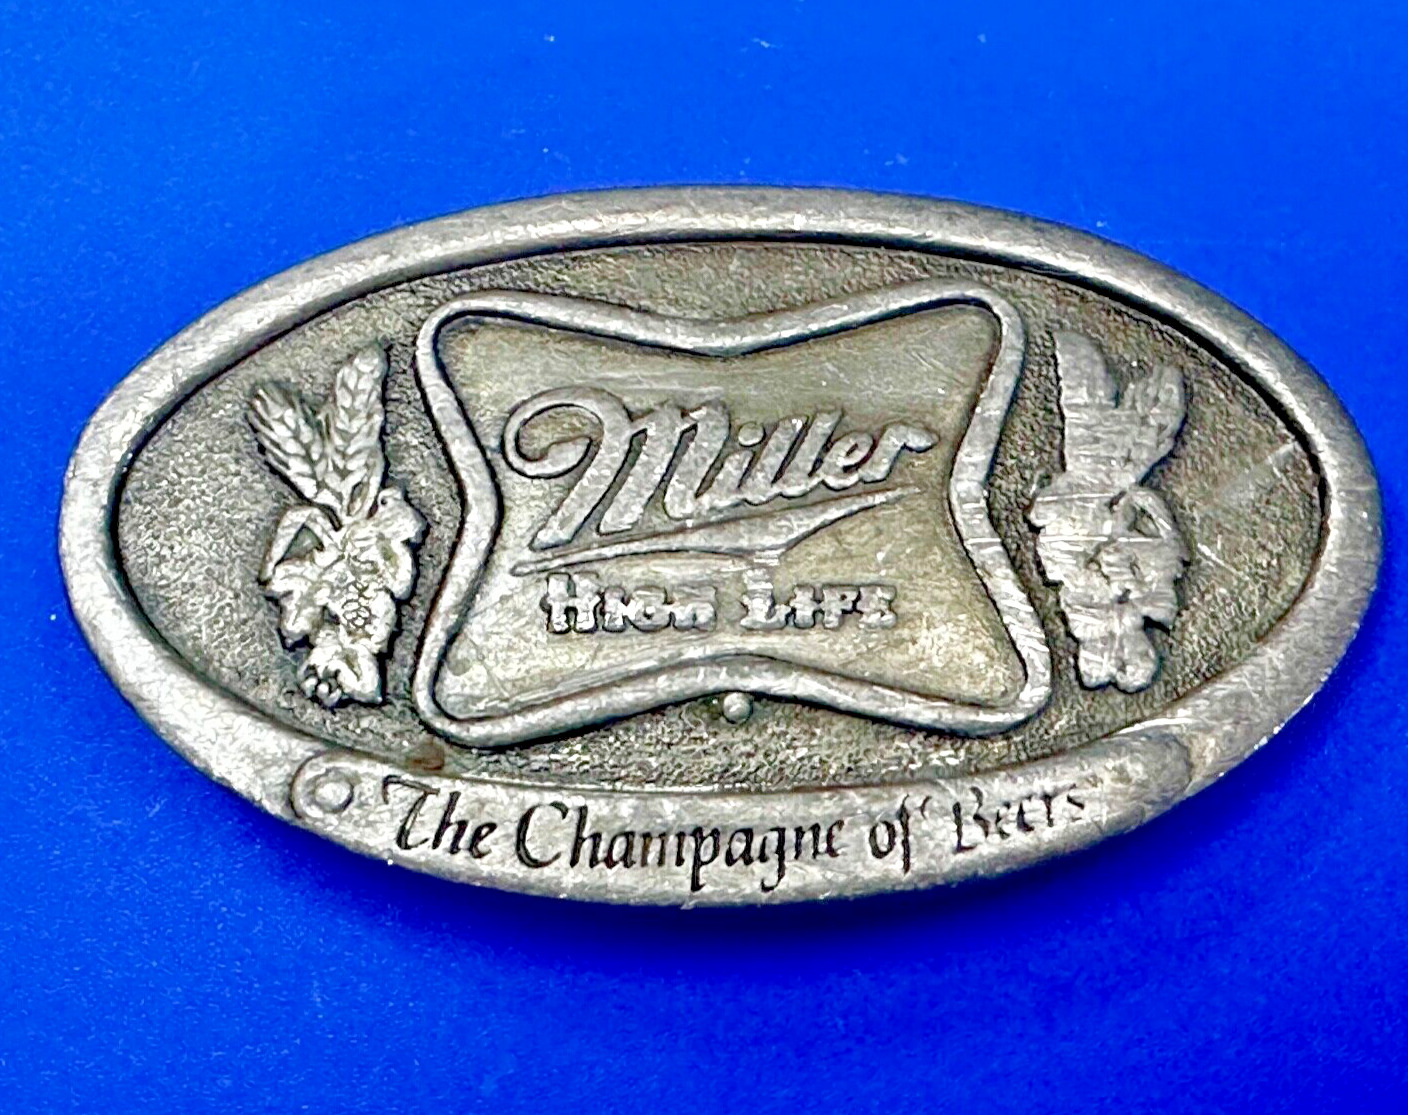 MILLER HIGH LIFE Champagne of Beers Collectable G-169 1975 Bergamot Belt Buckle